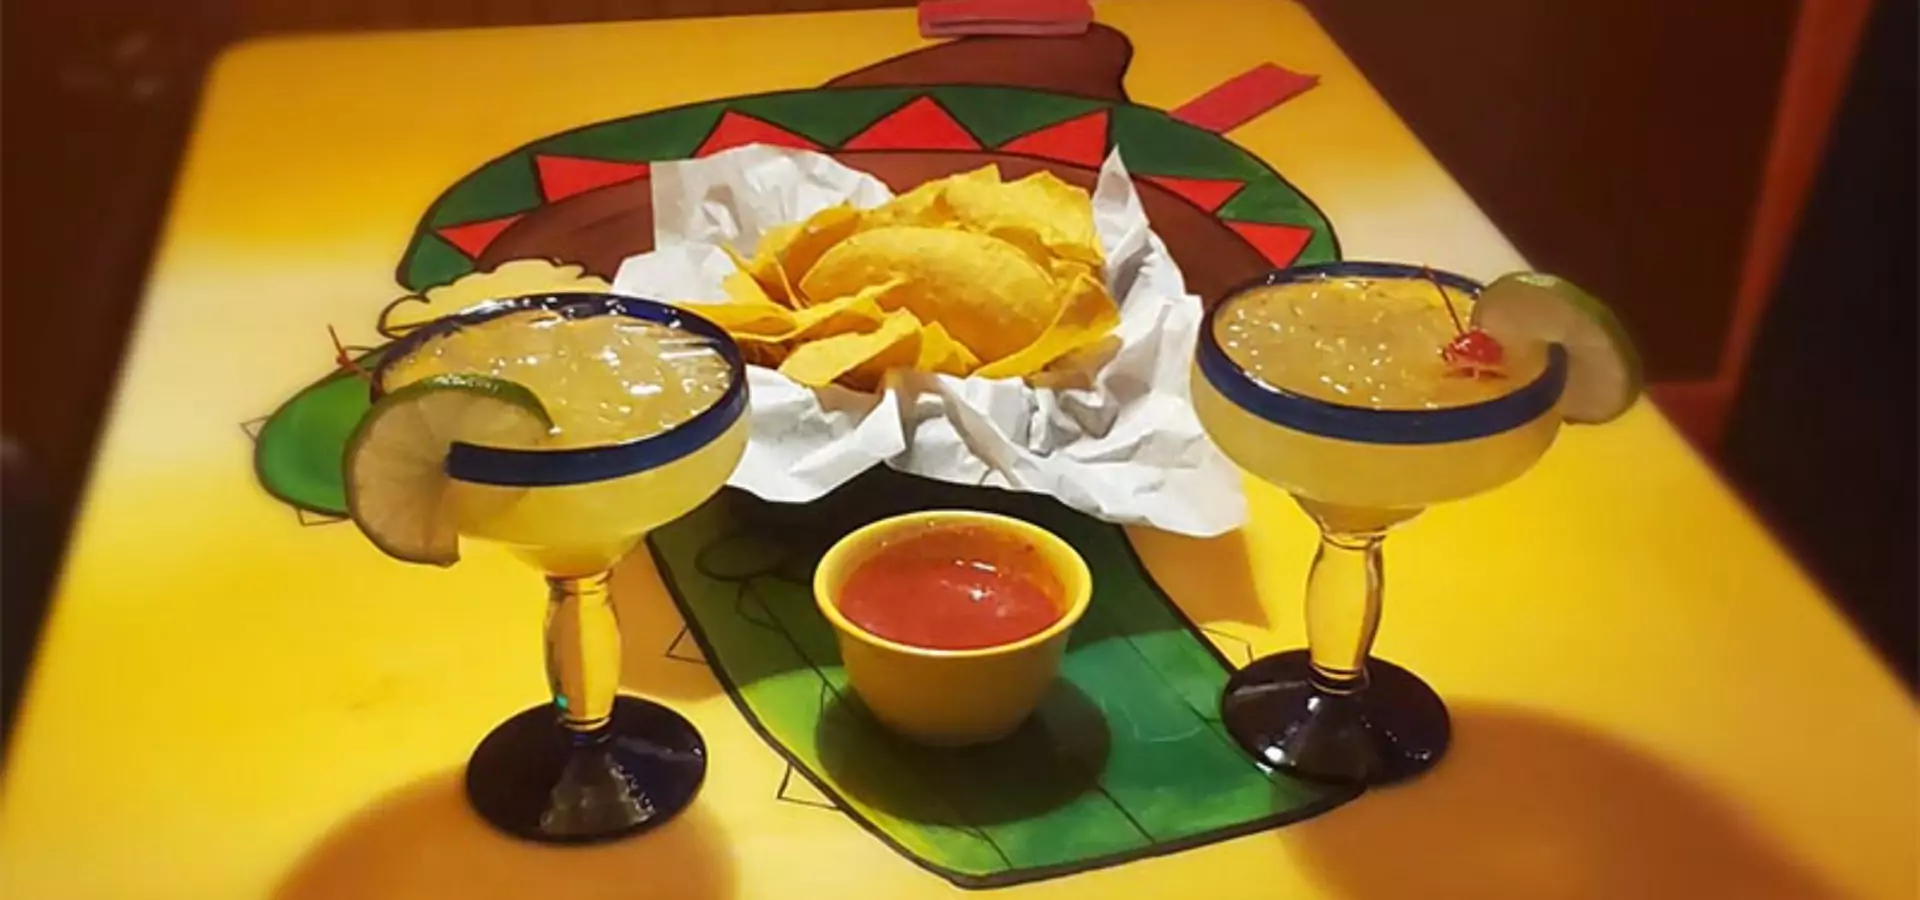 Margaritas and Chips